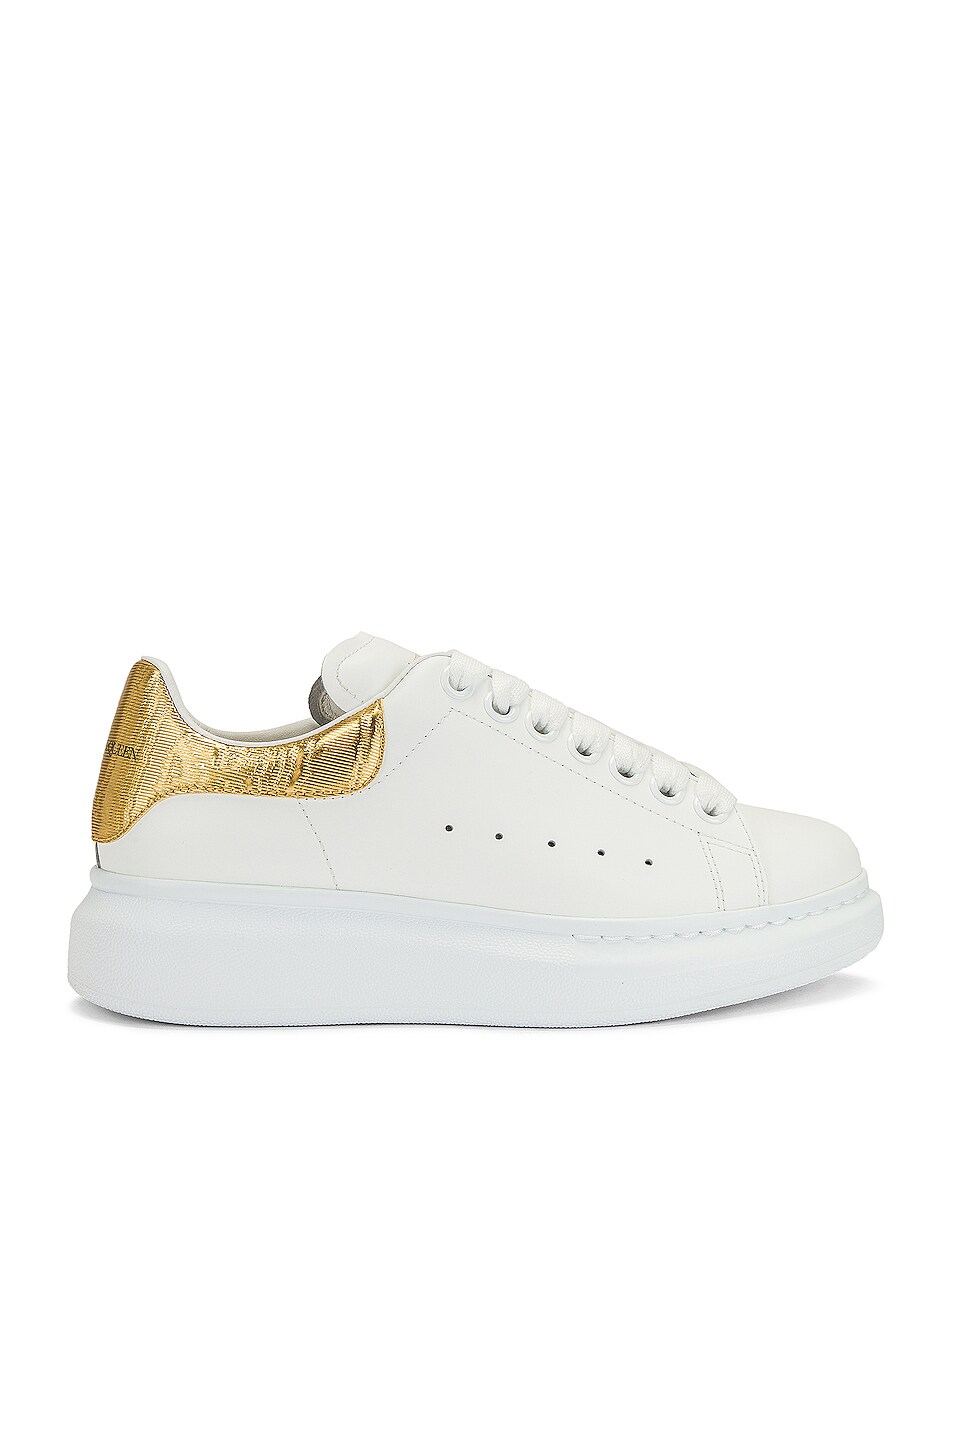 Image 1 of Alexander McQueen Leather Sneakers in White & Gold